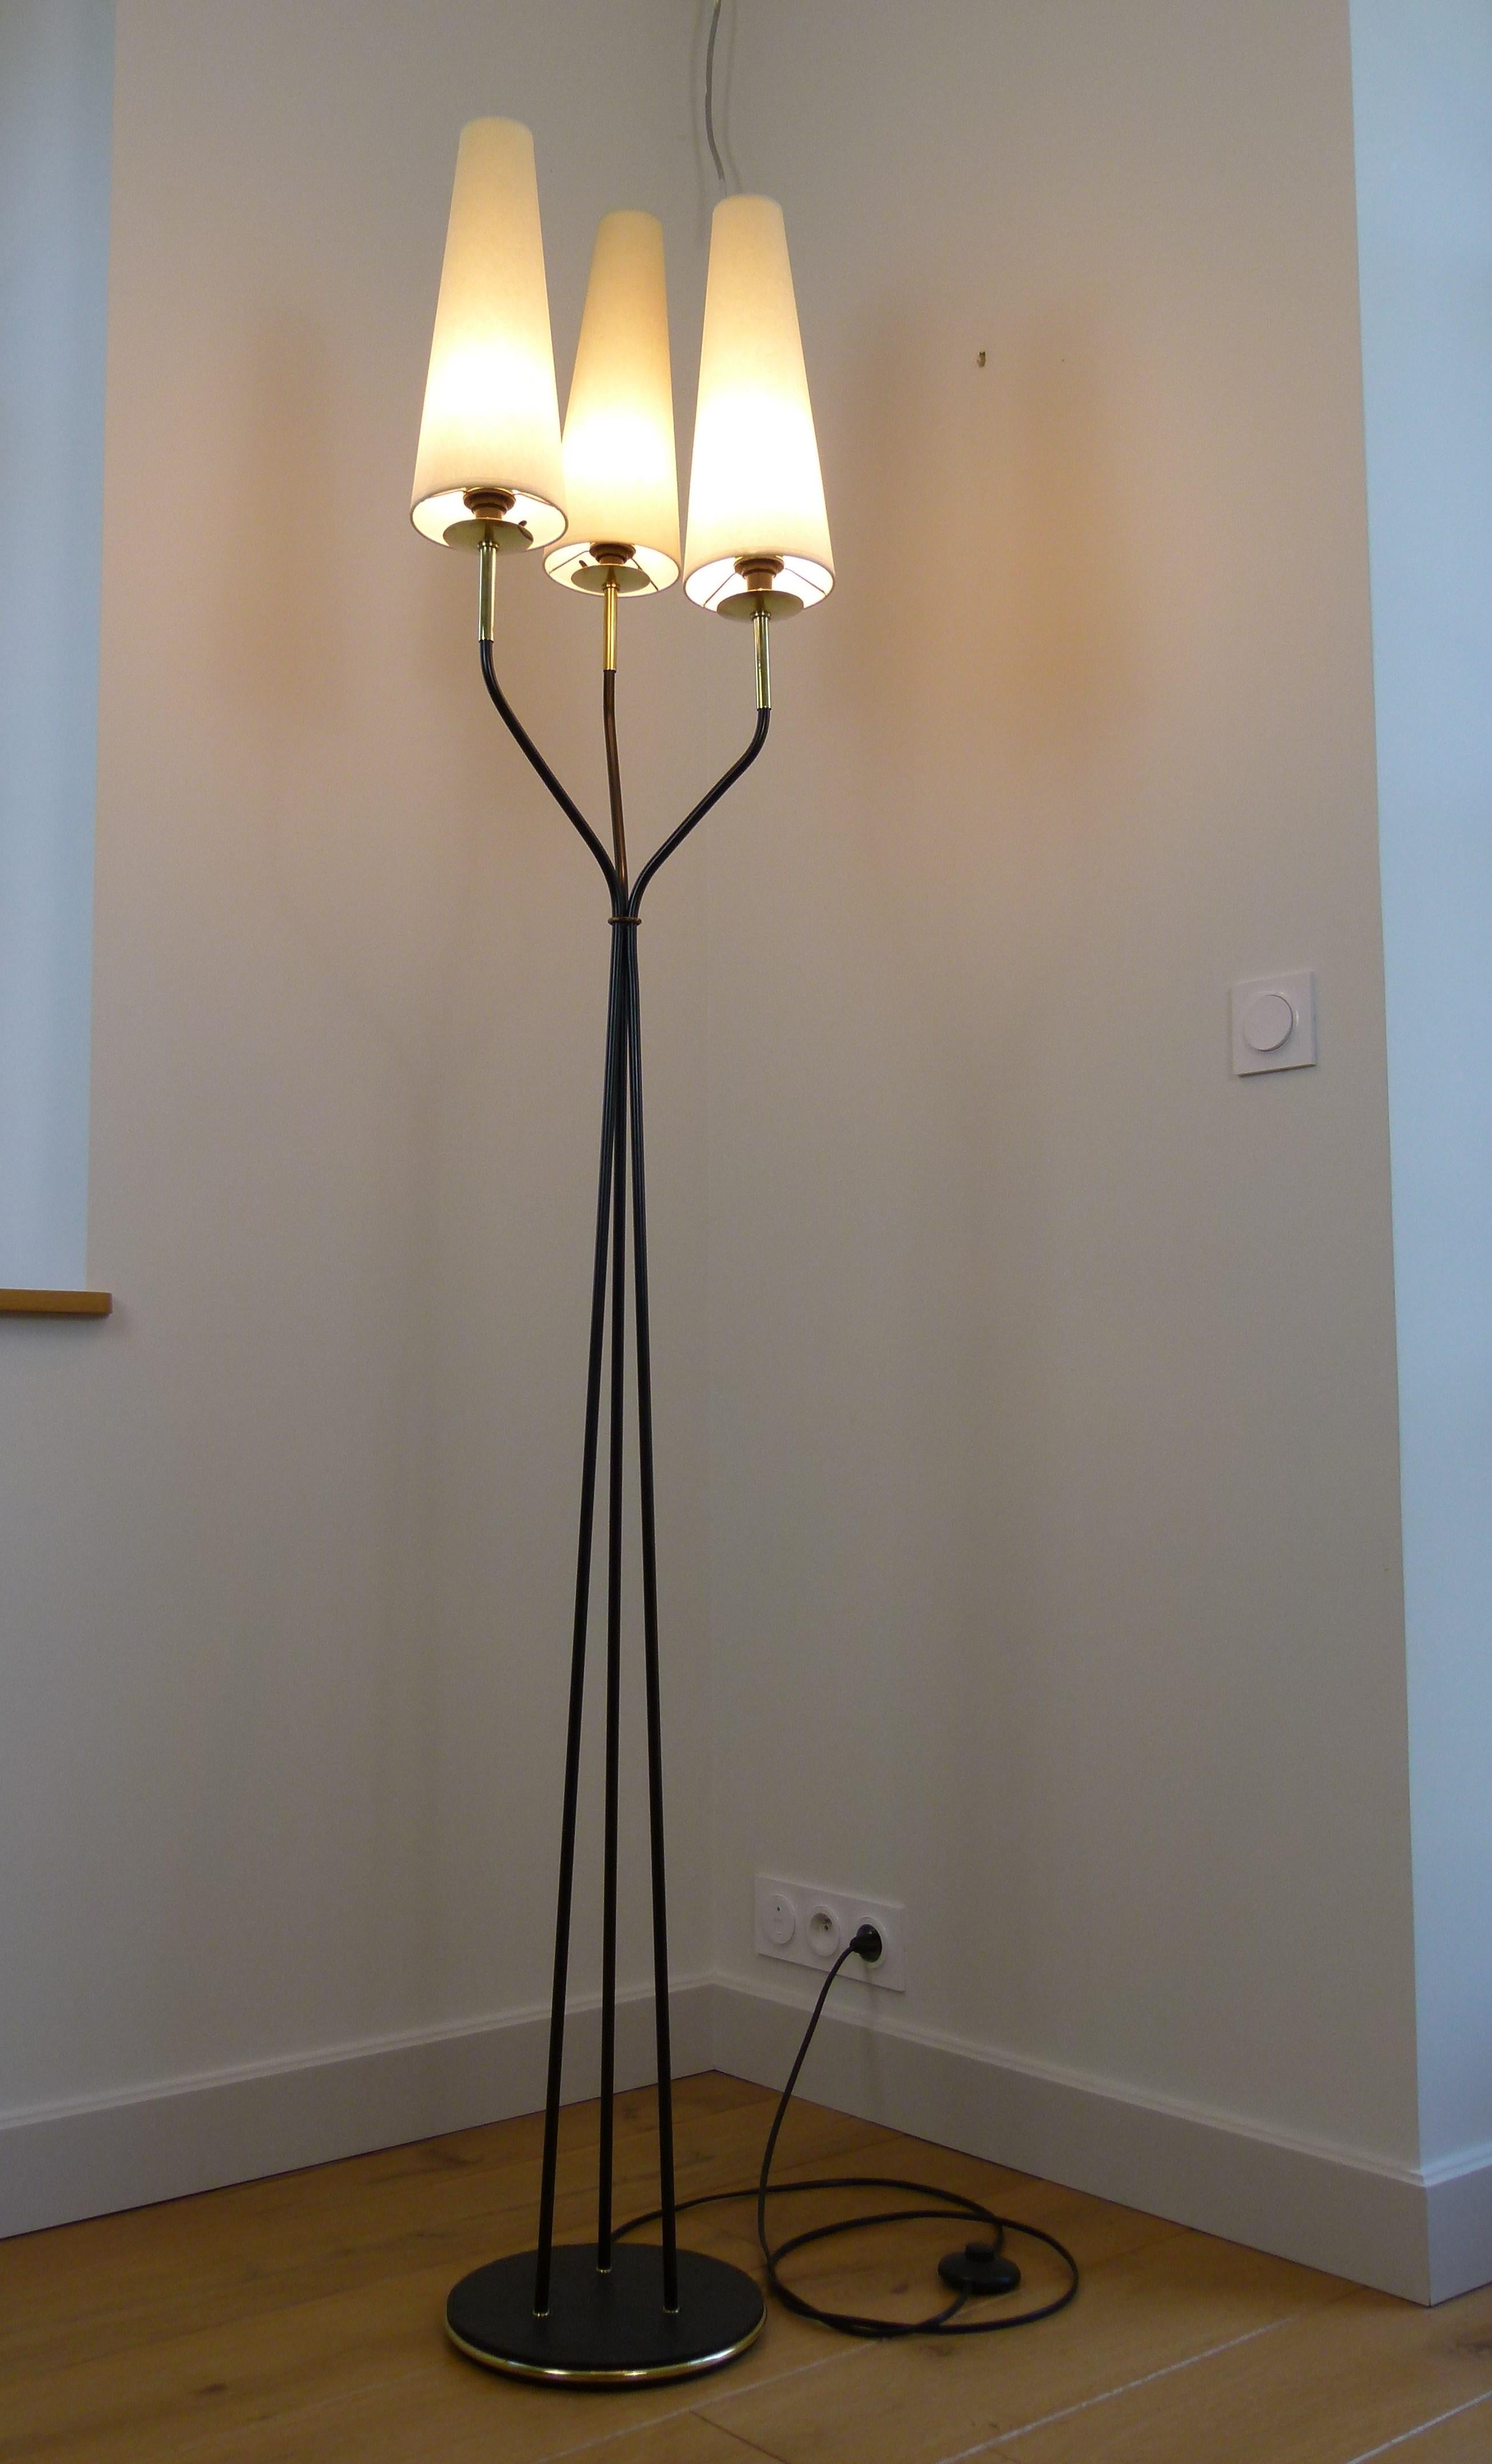 French Pair of 1950s Floor Lamp with Three Illuminated Arms by Maison Lunel